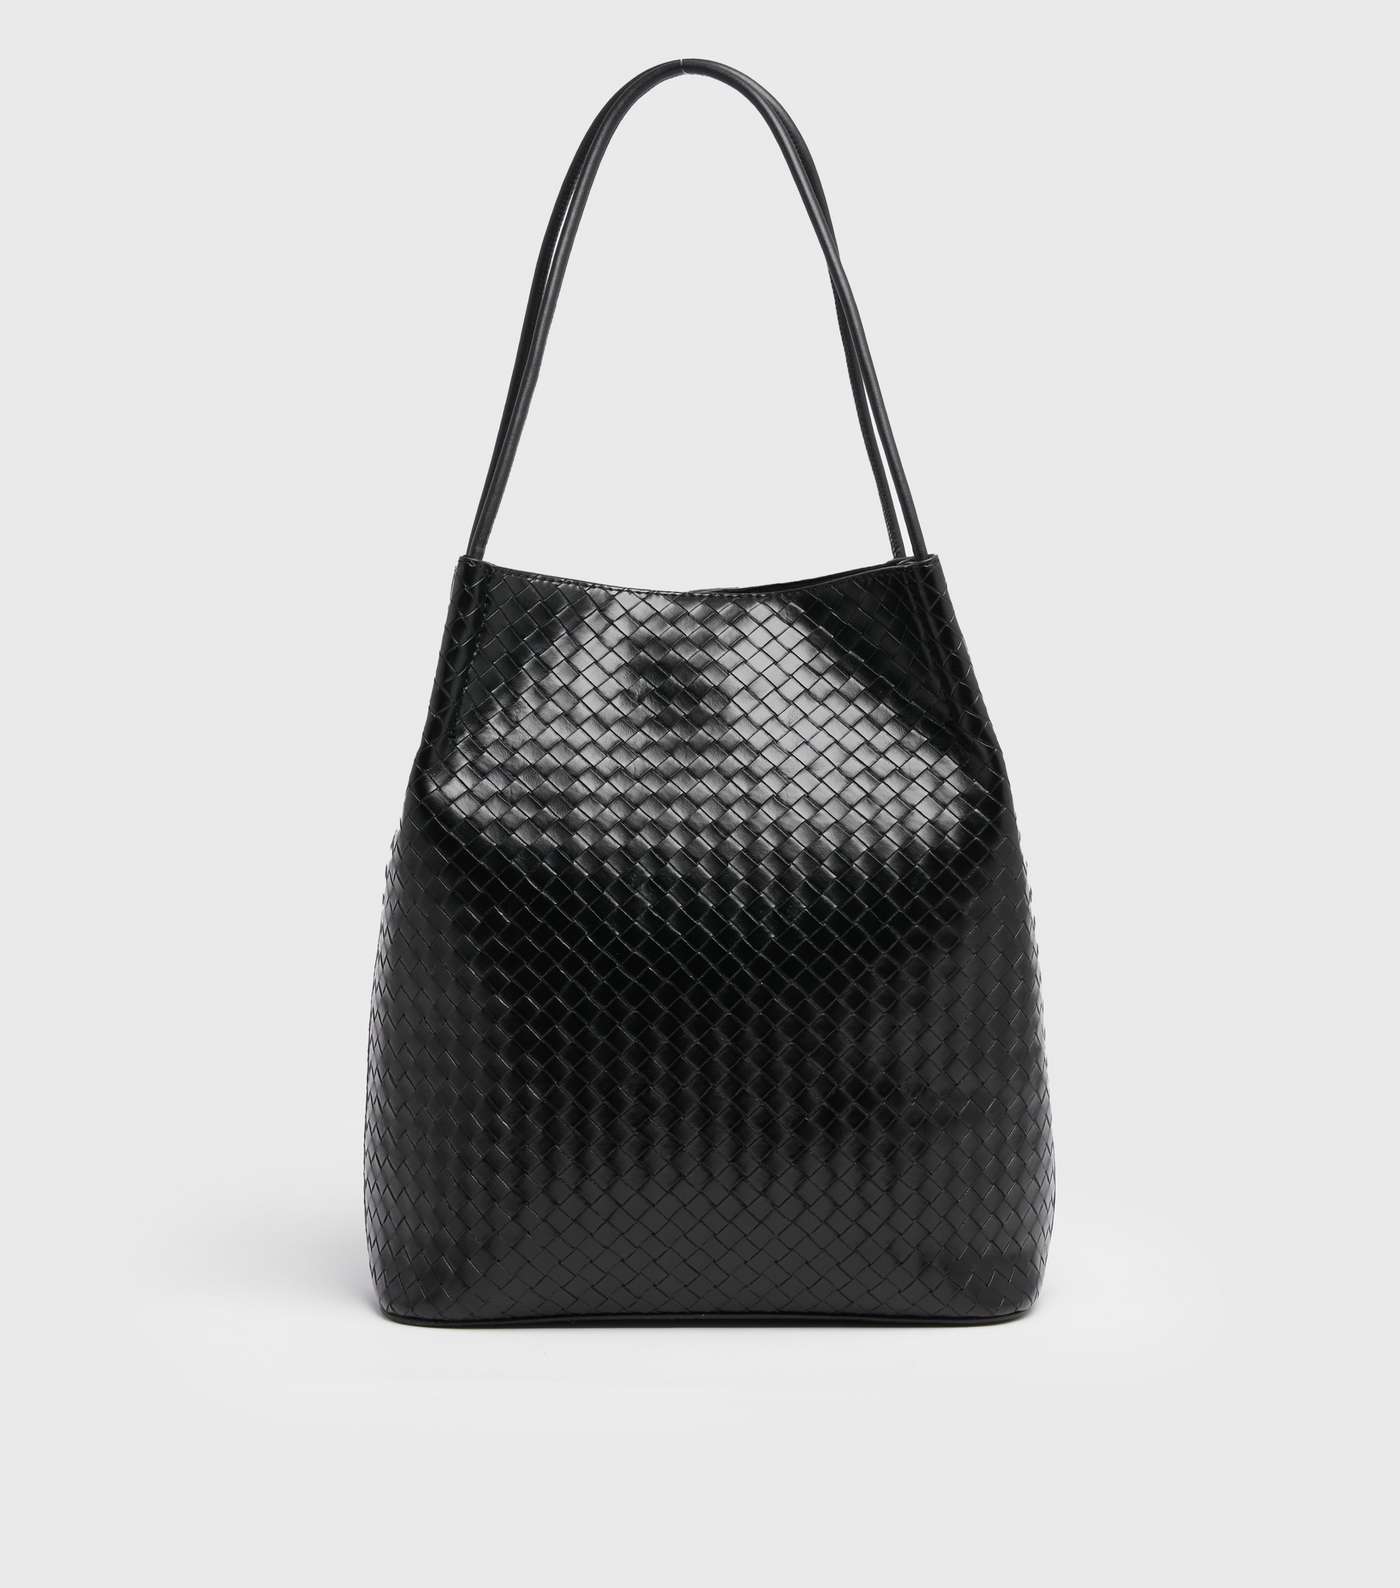 Black Leather-Look Woven Tote Bag